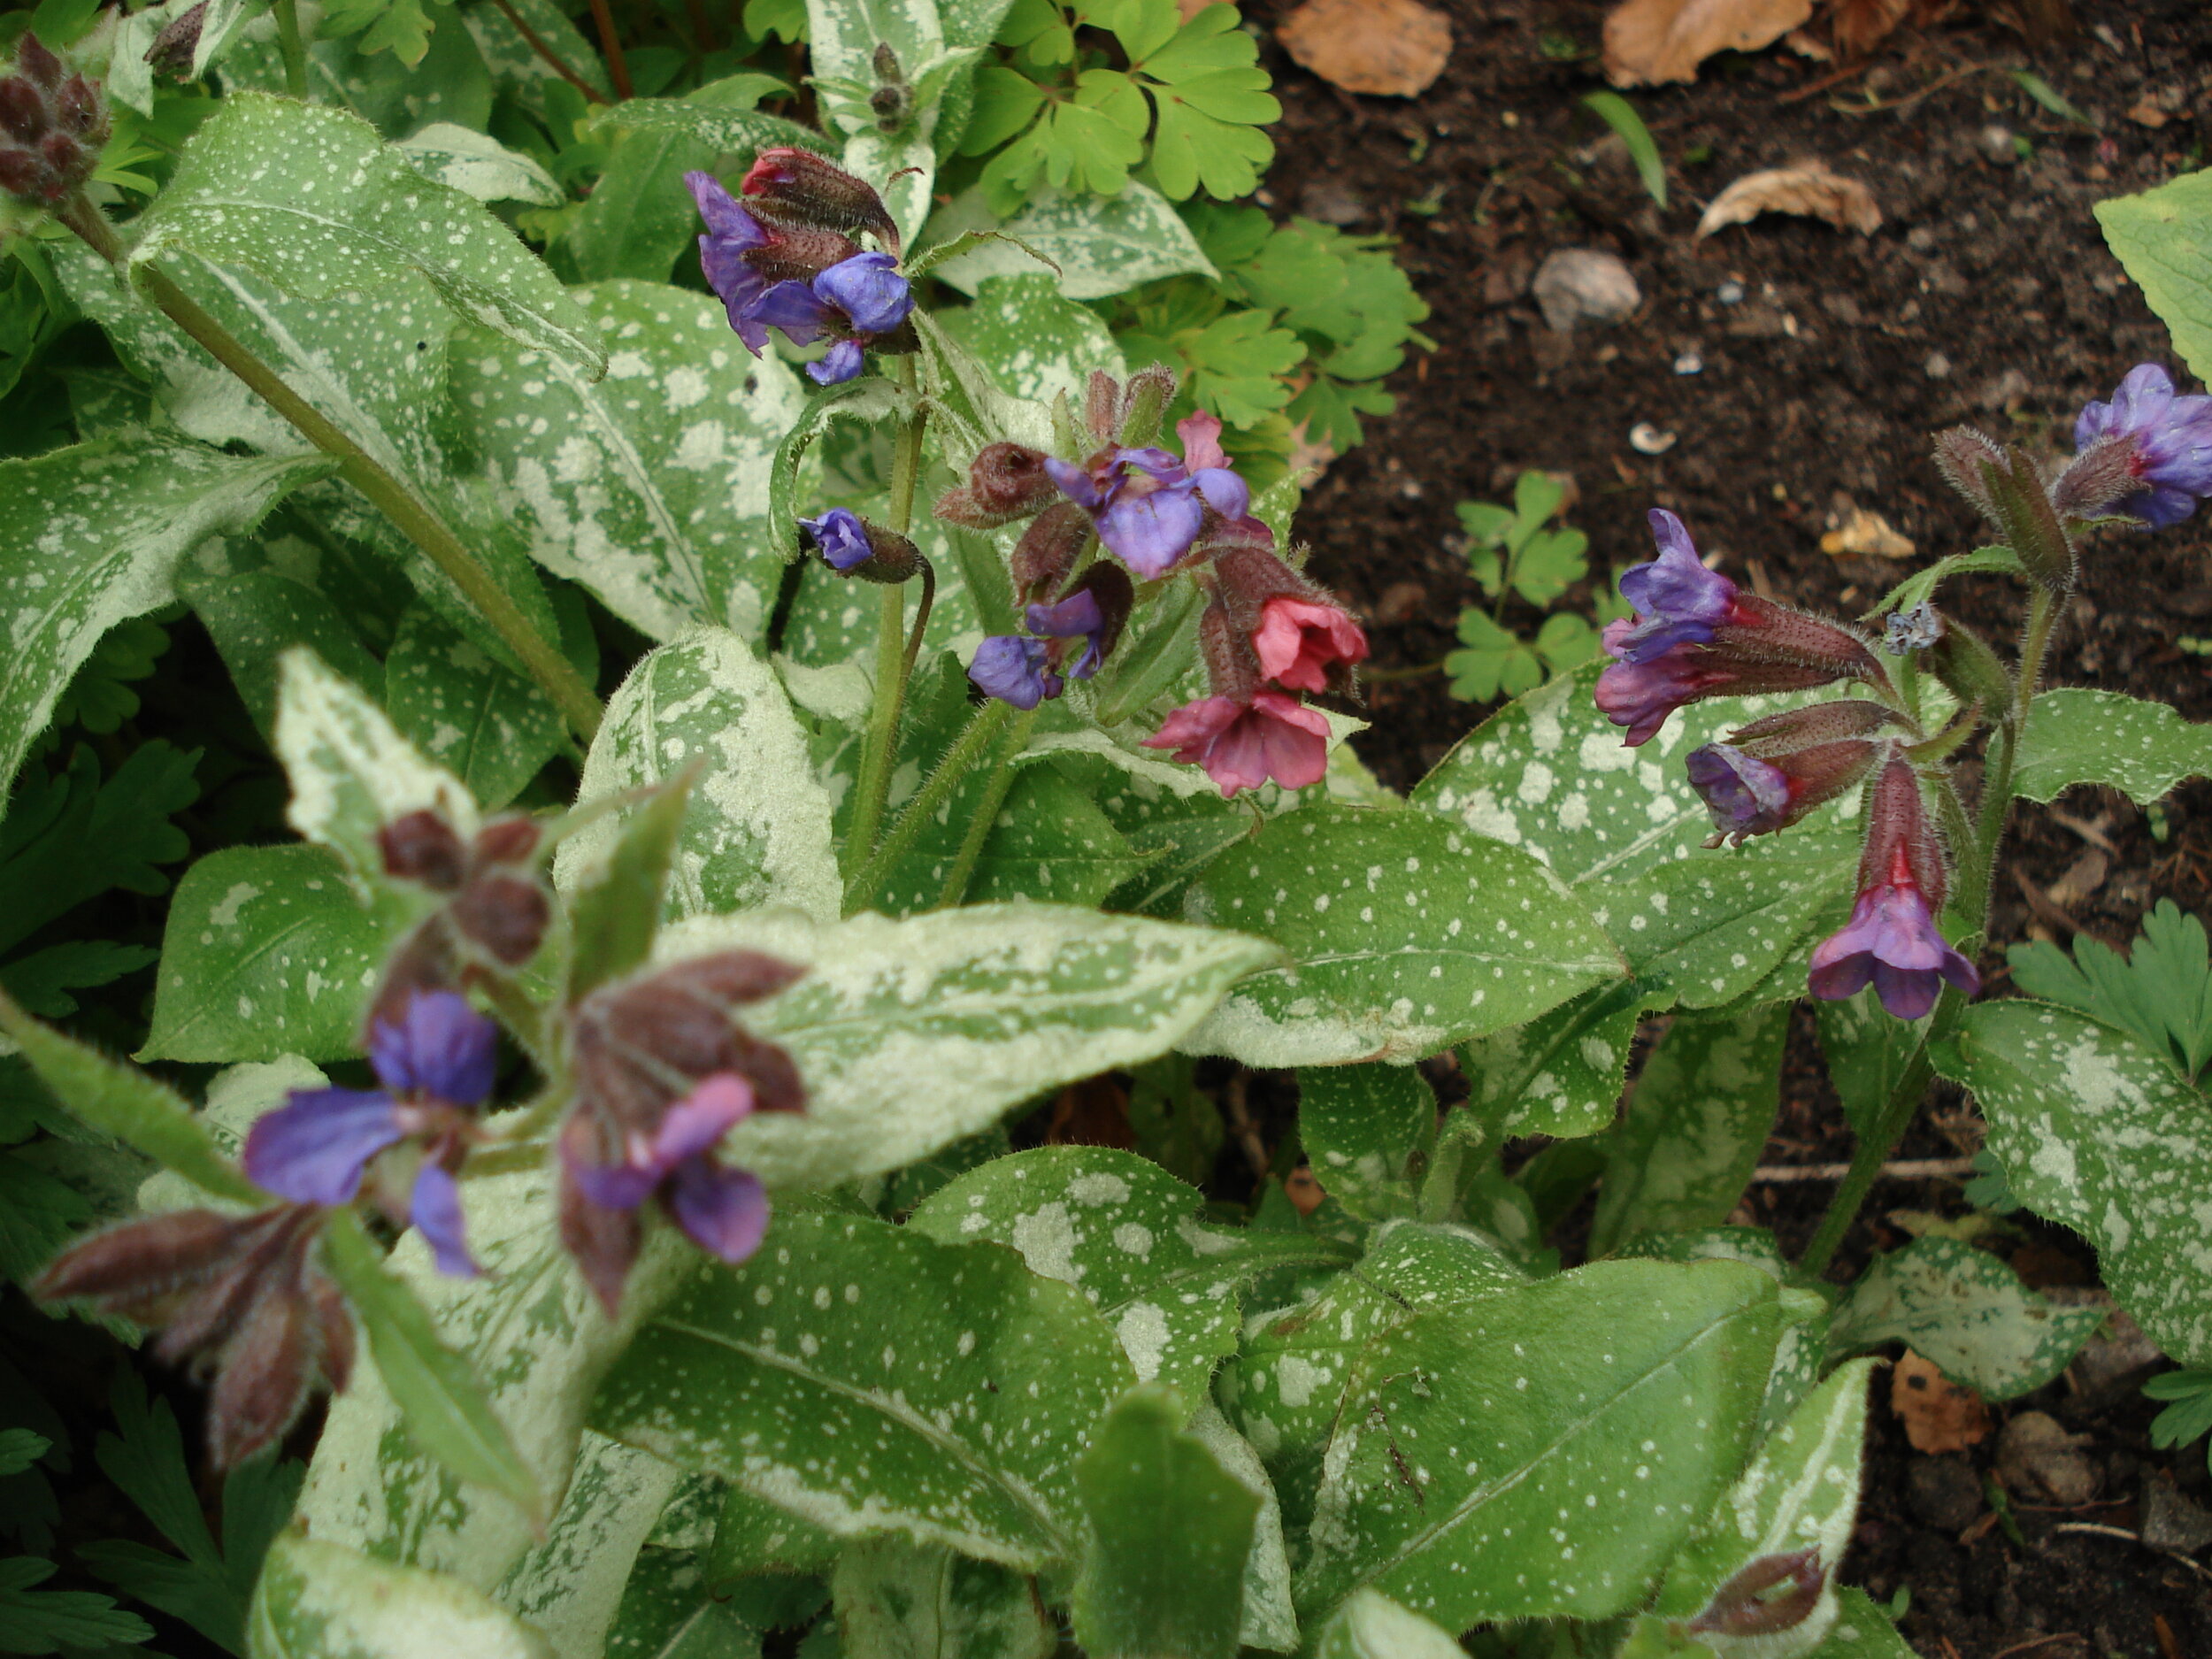  Lungwort pops up through the snow and offers repair for winter lungs 